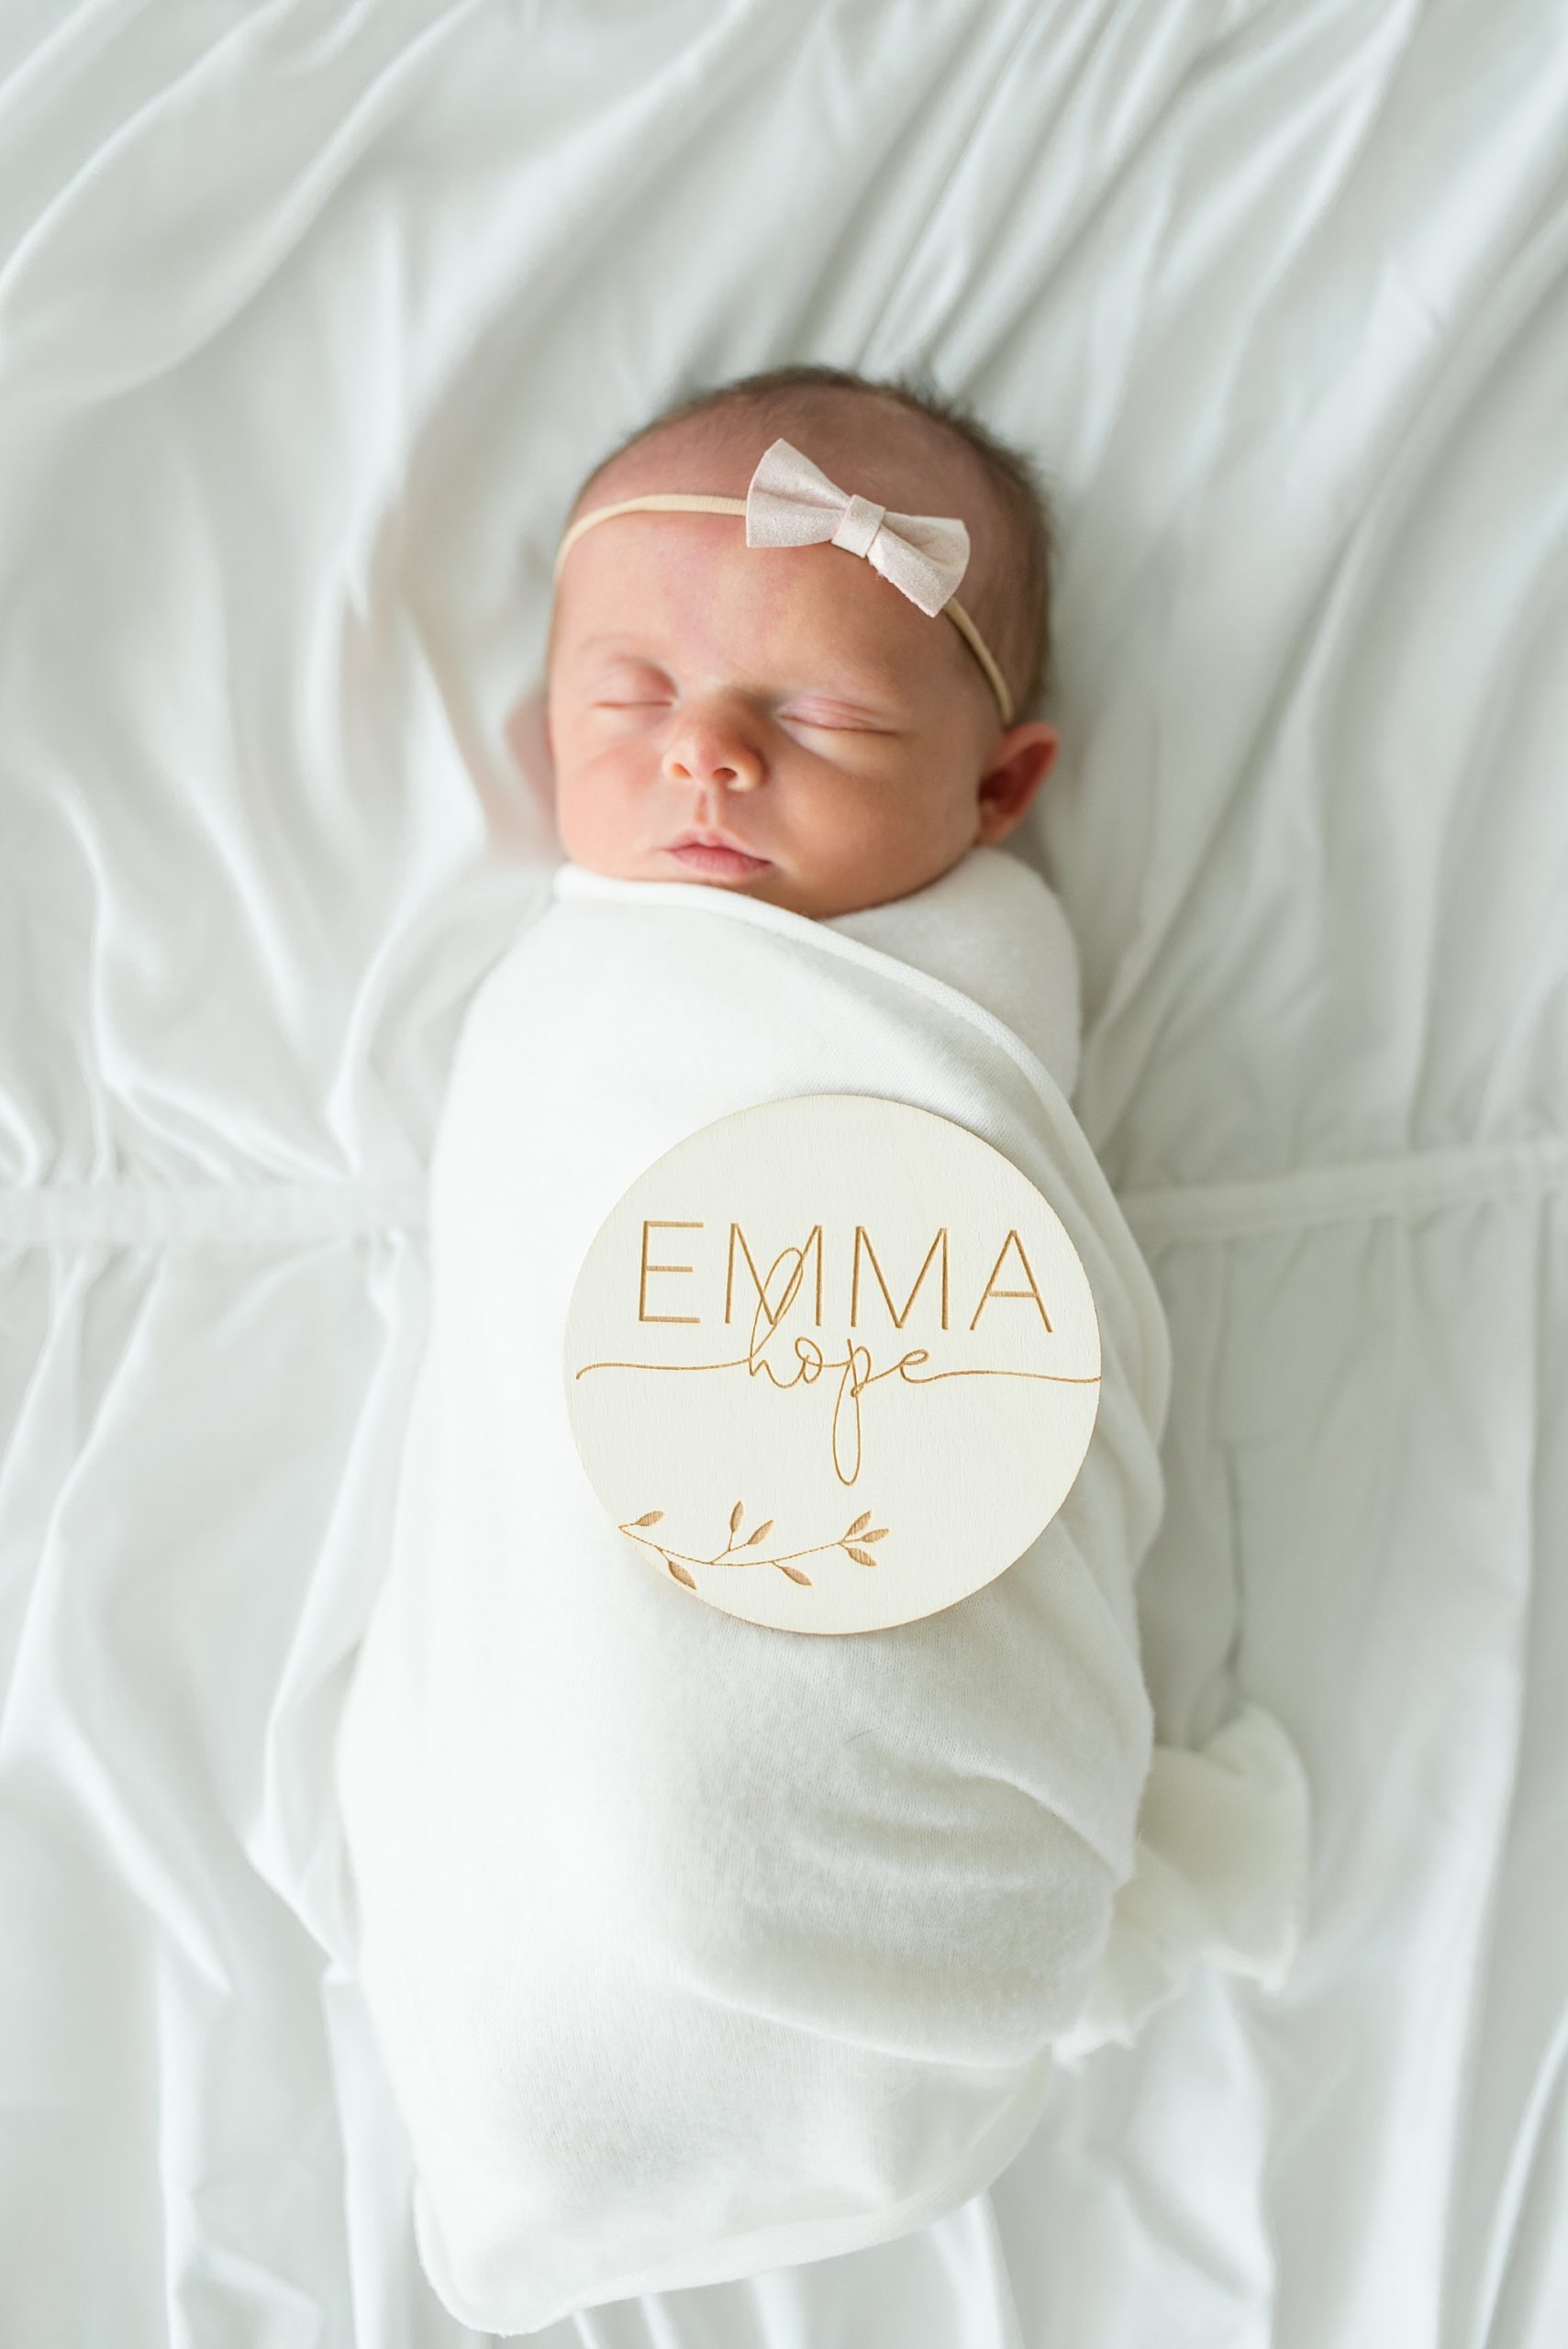 baby lays with "Emma" sign on her 